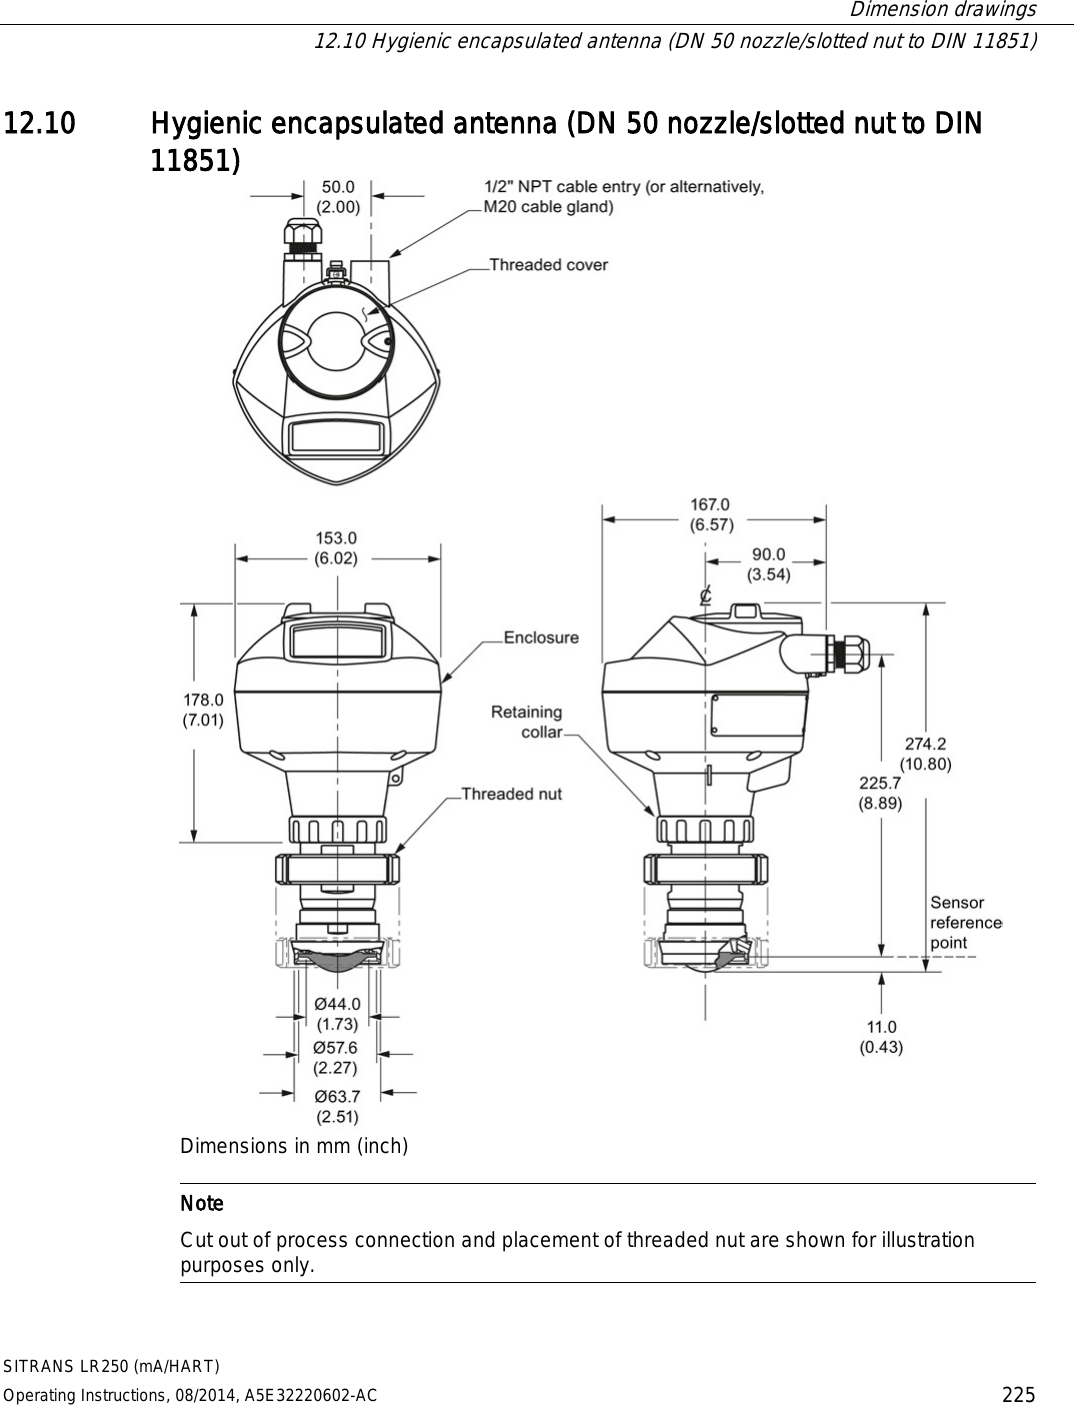  Dimension drawings  12.10 Hygienic encapsulated antenna (DN 50 nozzle/slotted nut to DIN 11851) SITRANS LR250 (mA/HART) Operating Instructions, 08/2014, A5E32220602-AC 225 12.10 Hygienic encapsulated antenna (DN 50 nozzle/slotted nut to DIN 11851)  Dimensions in mm (inch)   Note Cut out of process connection and placement of threaded nut are shown for illustration purposes only.  